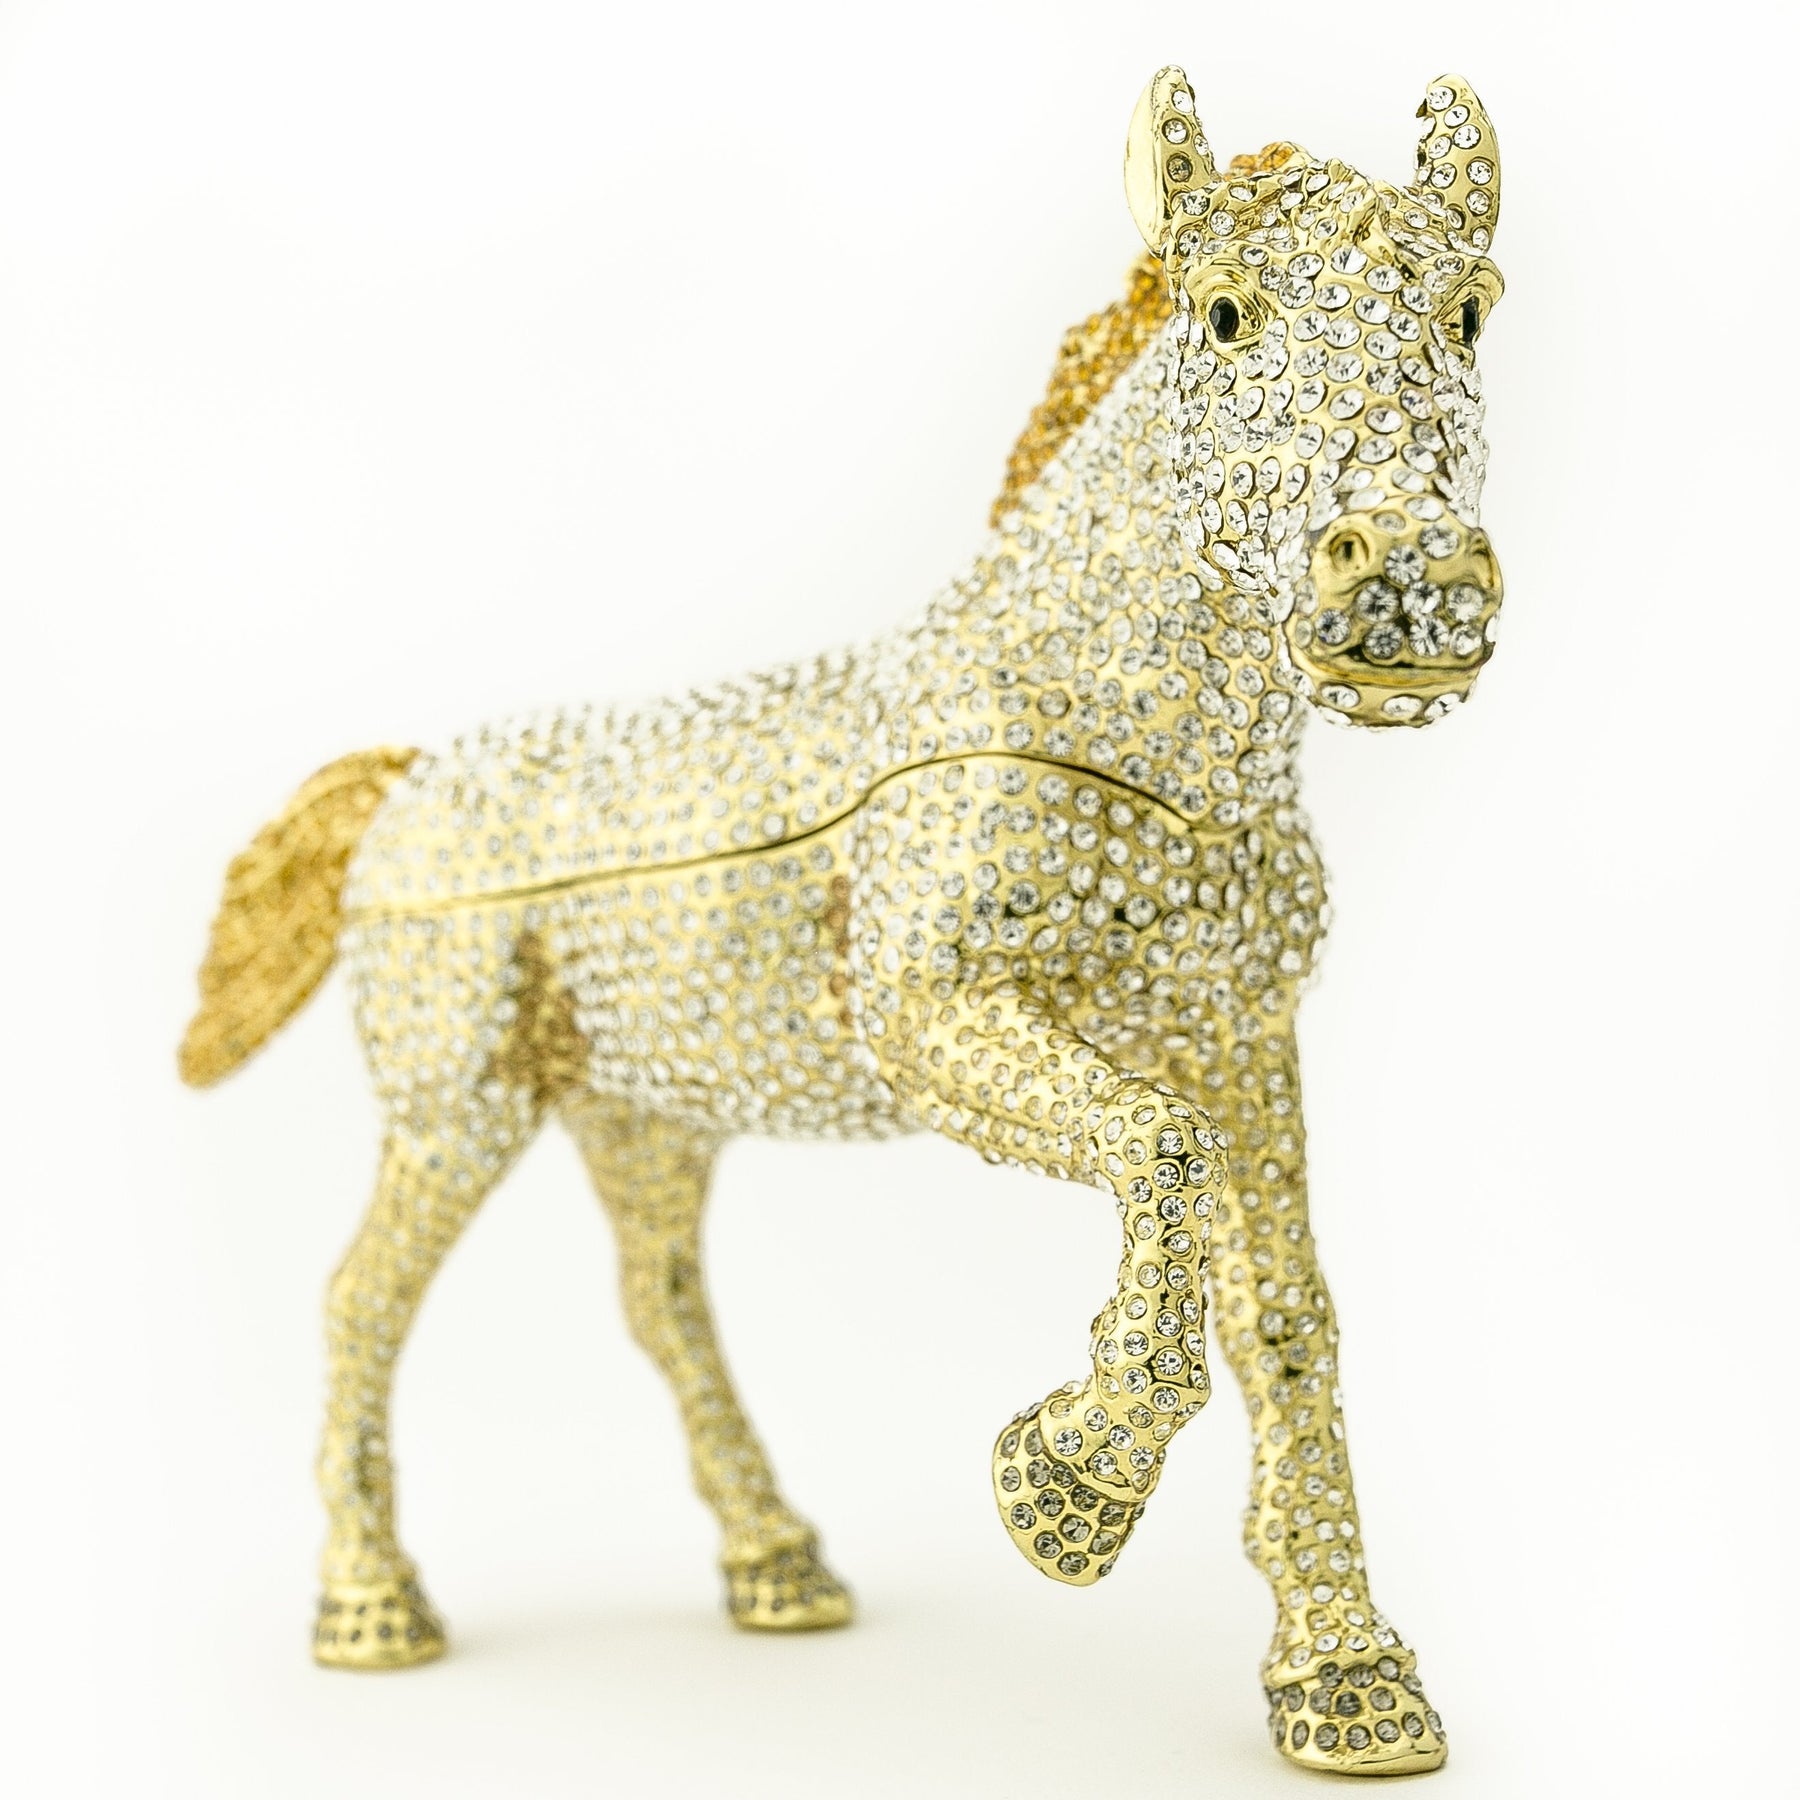 Large Golden Horse Decorated with White Crystals trinket box Keren Kopal